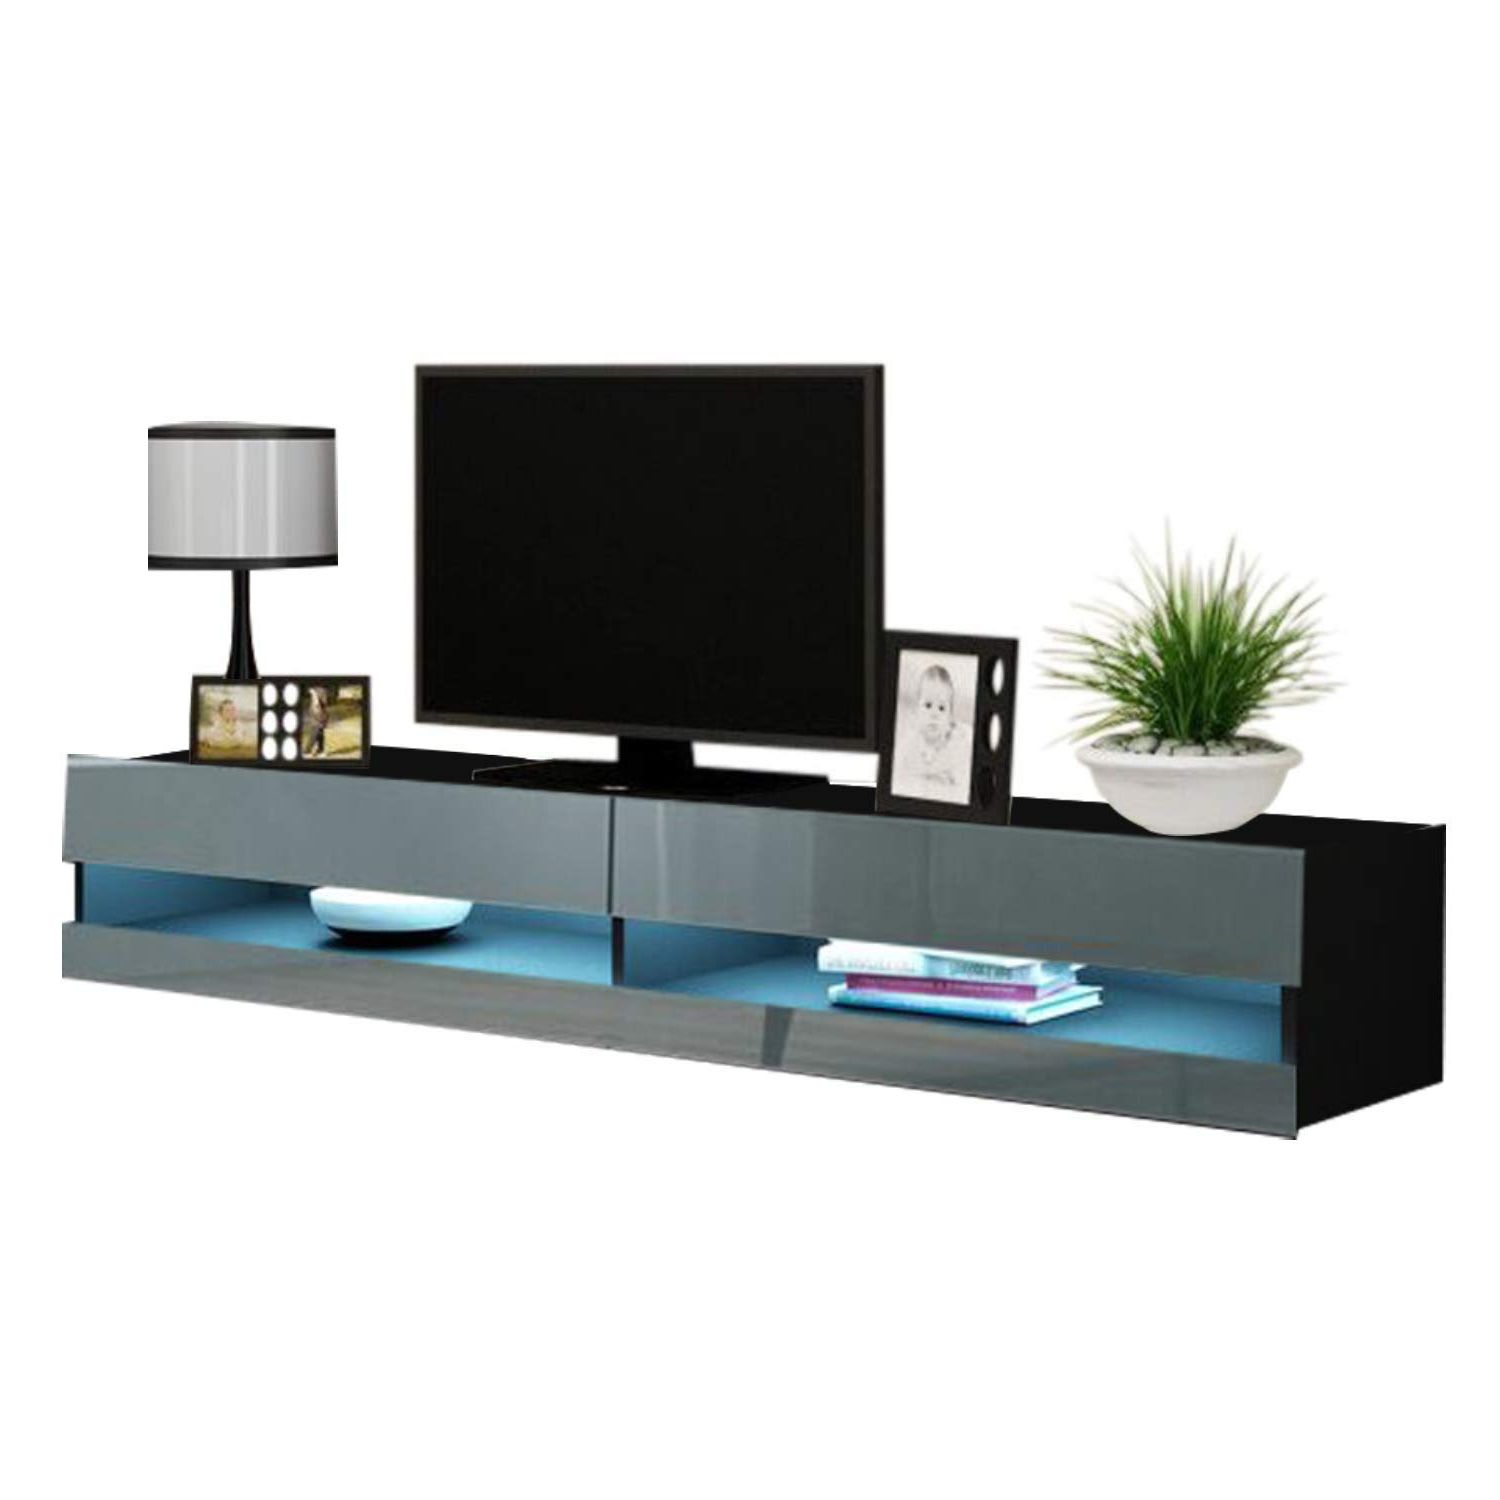 Vigo New 180 Led Wall Mounted 71" Floating Tv Stand, Black With Regard To Polar Led Tv Stands (View 14 of 20)